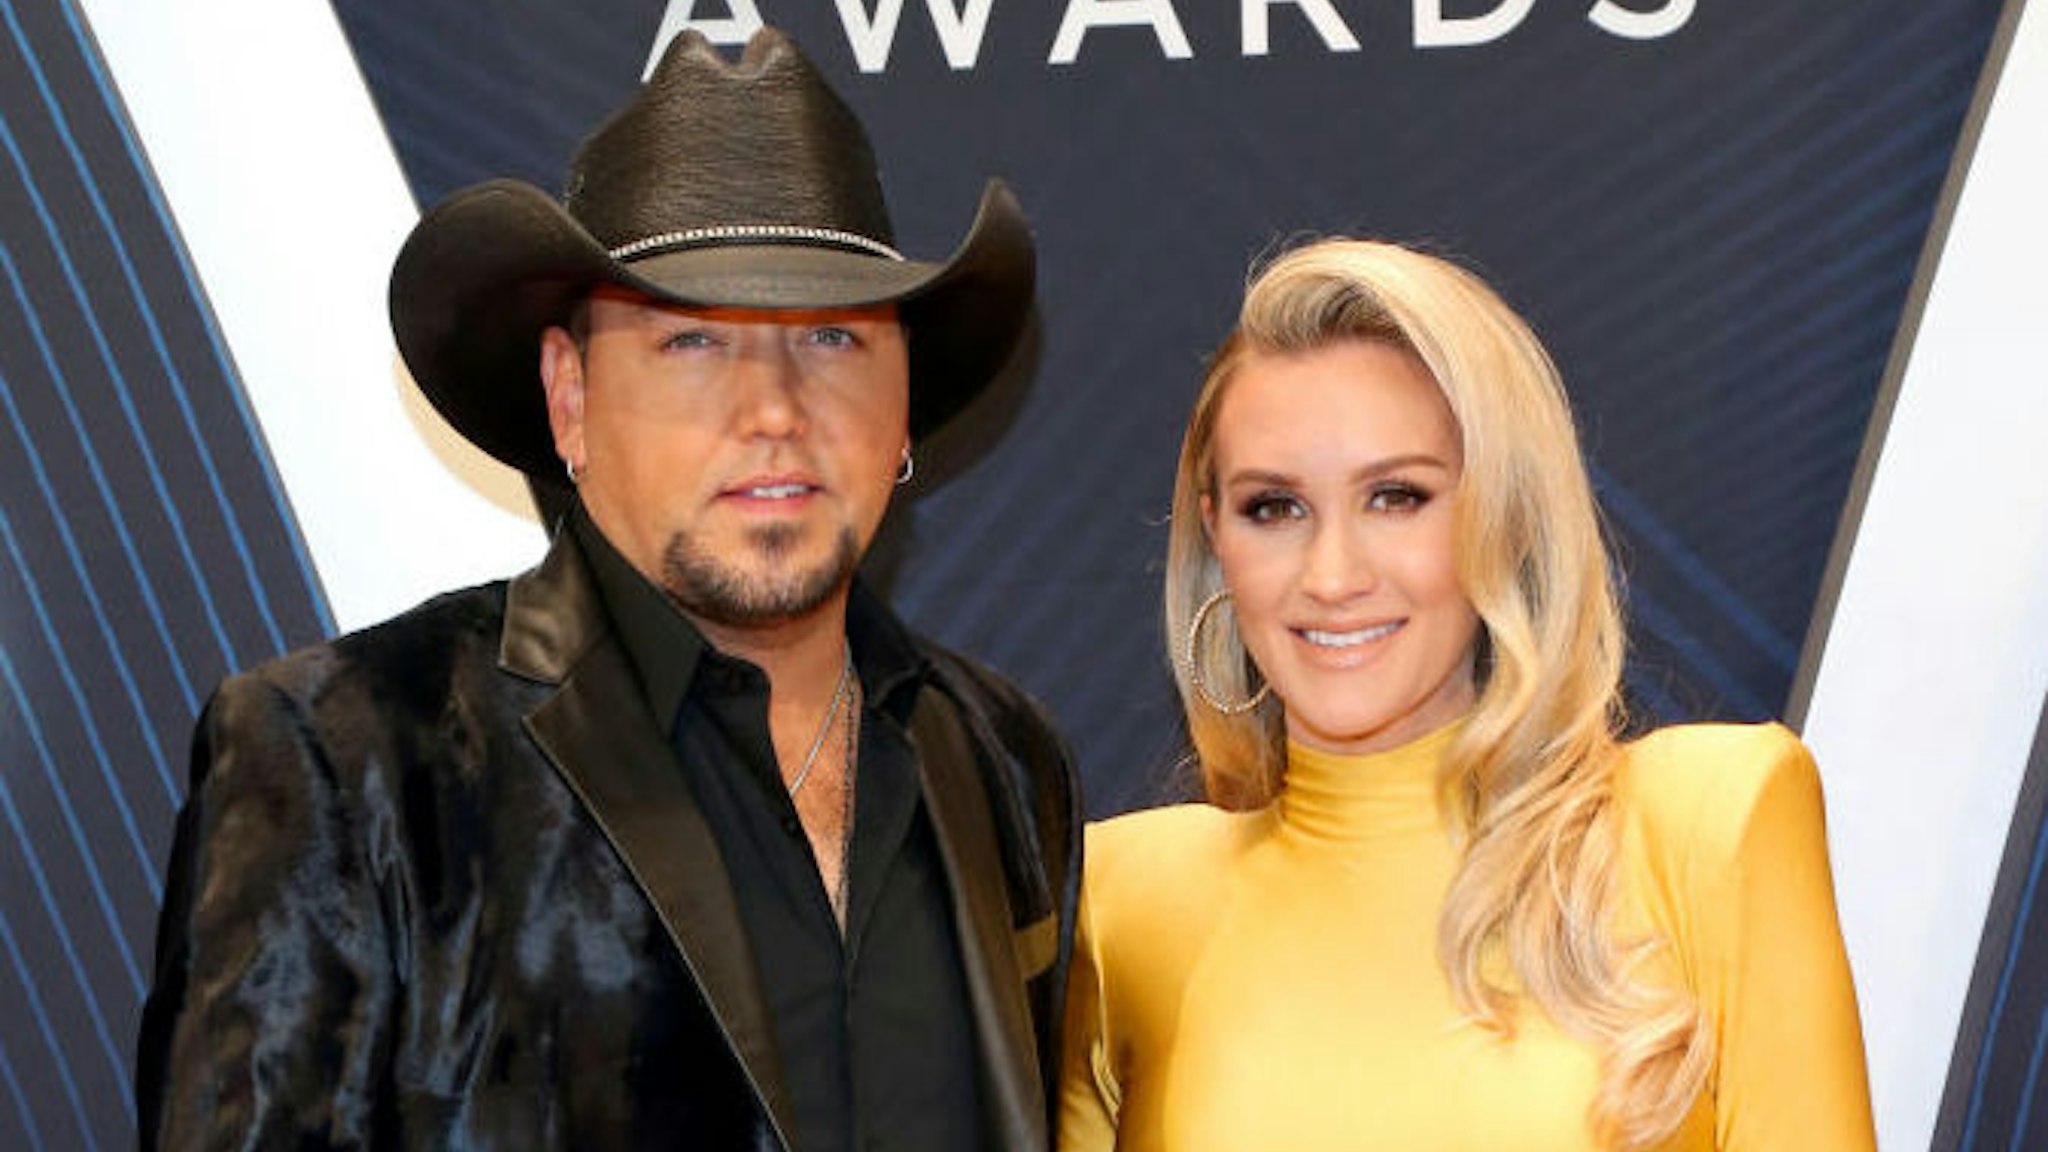 Singer-songwriter Jason Aldean and Brittany Kerr attend the 52nd annual CMA Awards at the Bridgestone Arena on November 14, 2018 in Nashville, Tennessee.